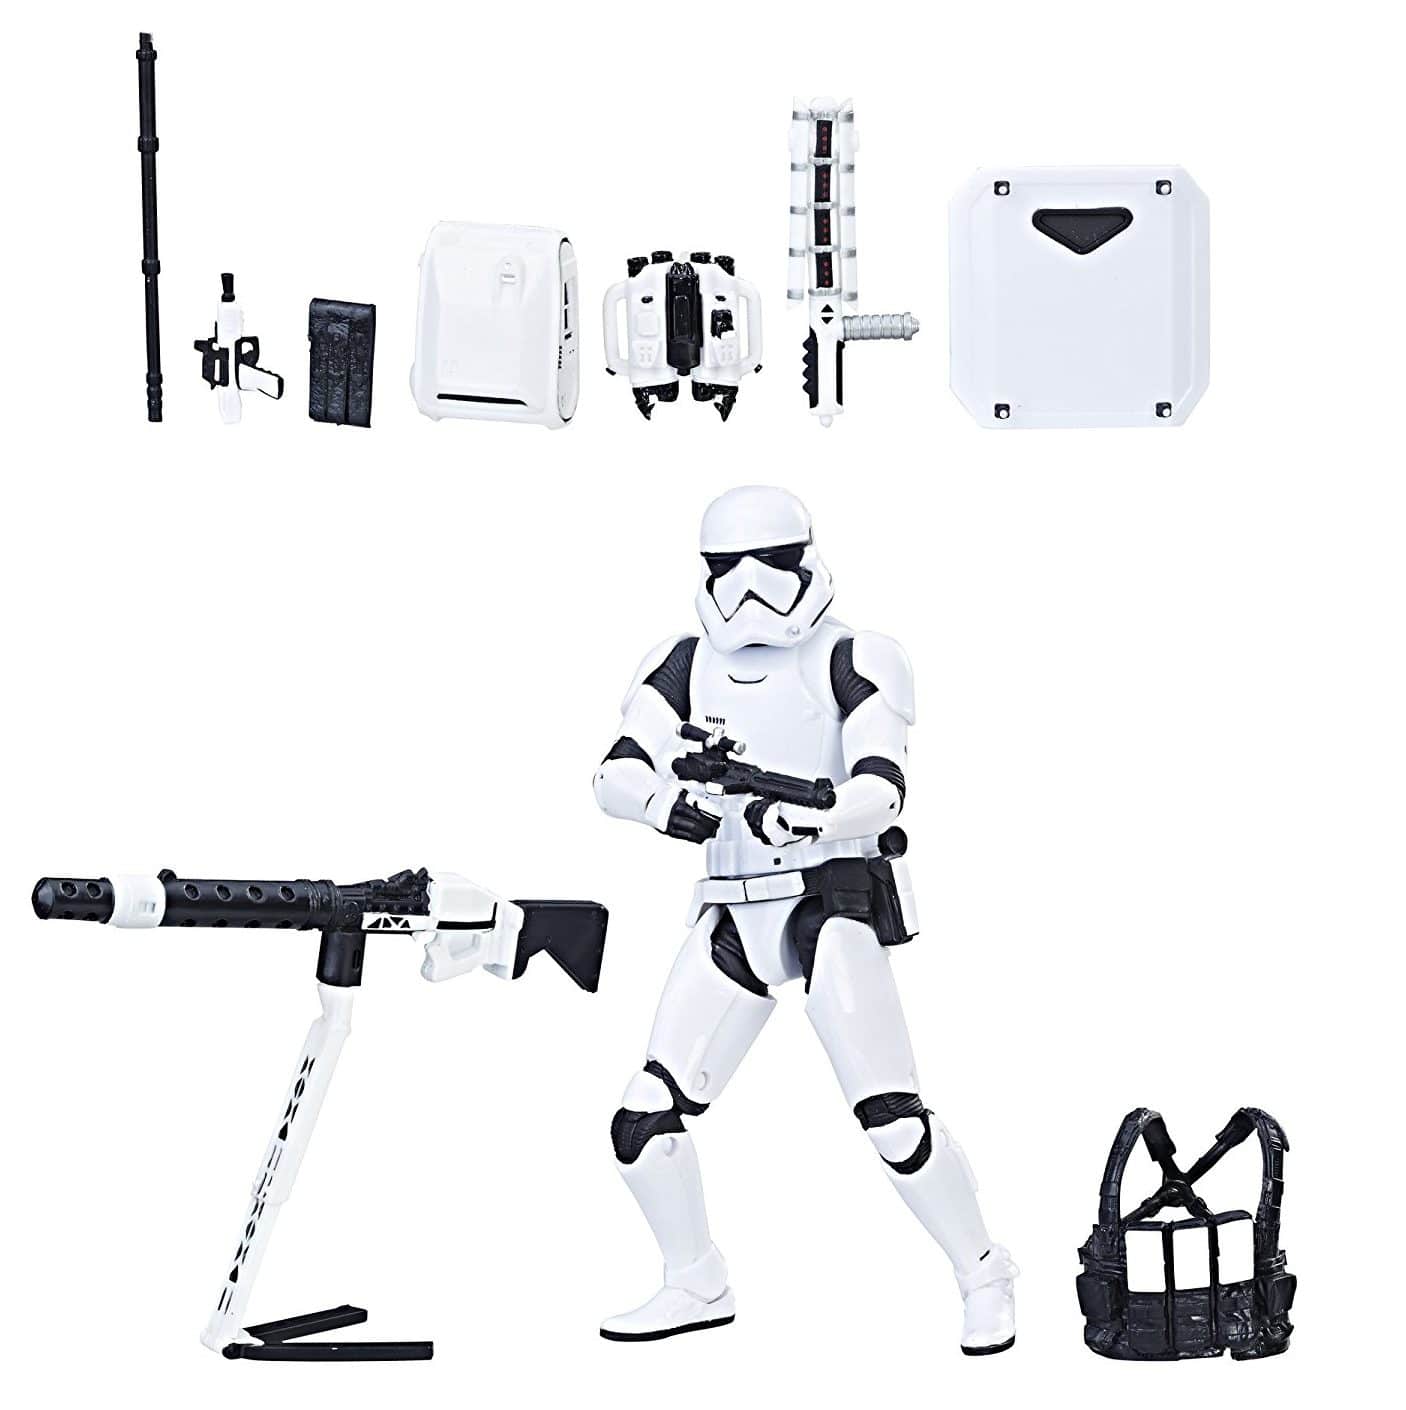 Hot Toy 2017: Star Wars the Black Series Stormtrooper Toys 2018